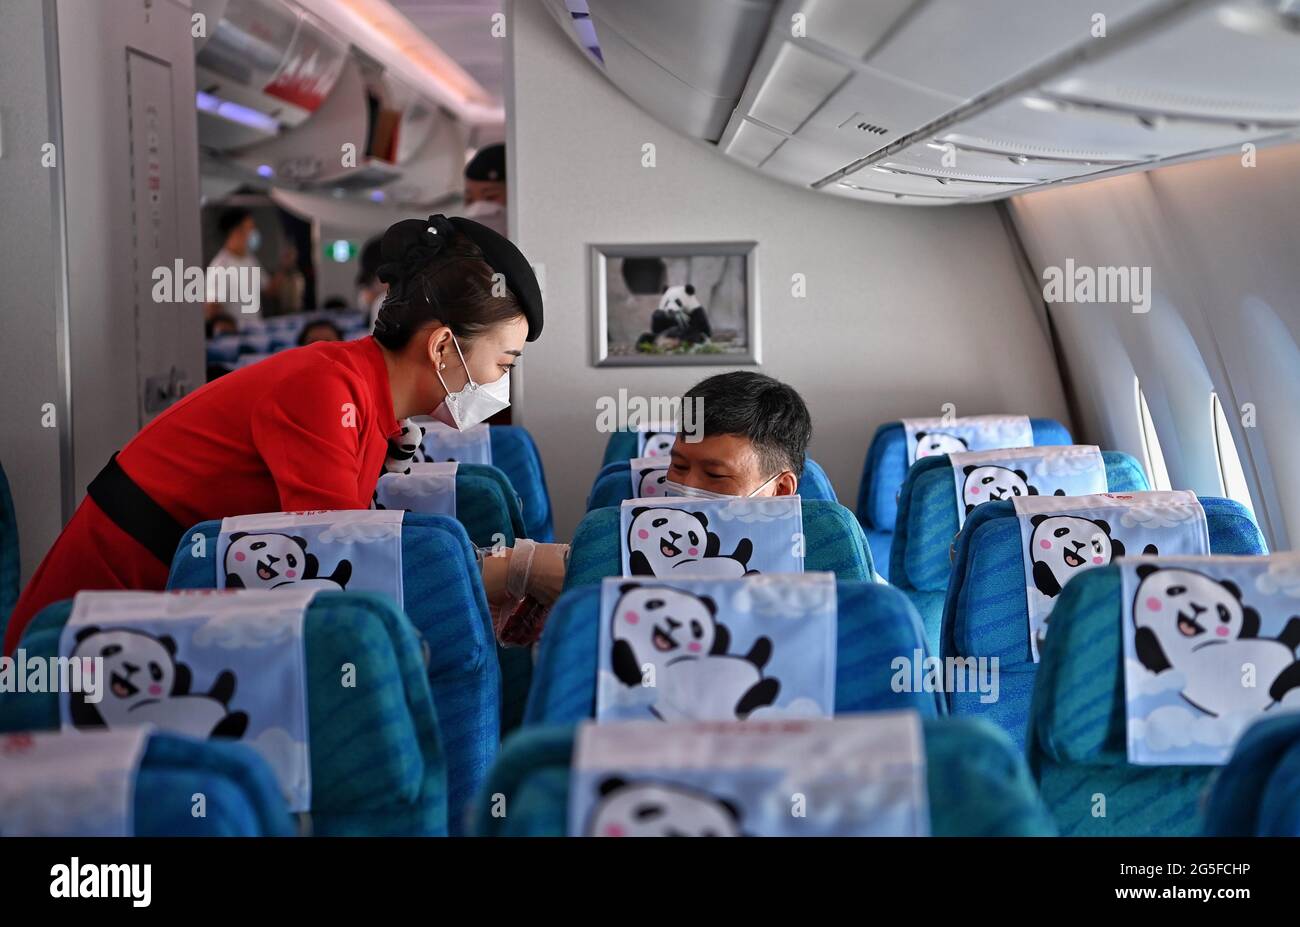 Chengdu. 27th June, 2021. A cabin crew member explains safety guidelines to a passenger on flight 3U8001 of Sichuan Airlines at Chengdu Tianfu International Airport in southwest China's Sichuan Province, June 27, 2021. Chengdu Tianfu International Airport in southwest China's Sichuan Province has opened for operations, with a Sichuan Airlines flight bound for Beijing taking off on Sunday morning. Credit: Wang Xi/Xinhua/Alamy Live News Stock Photo